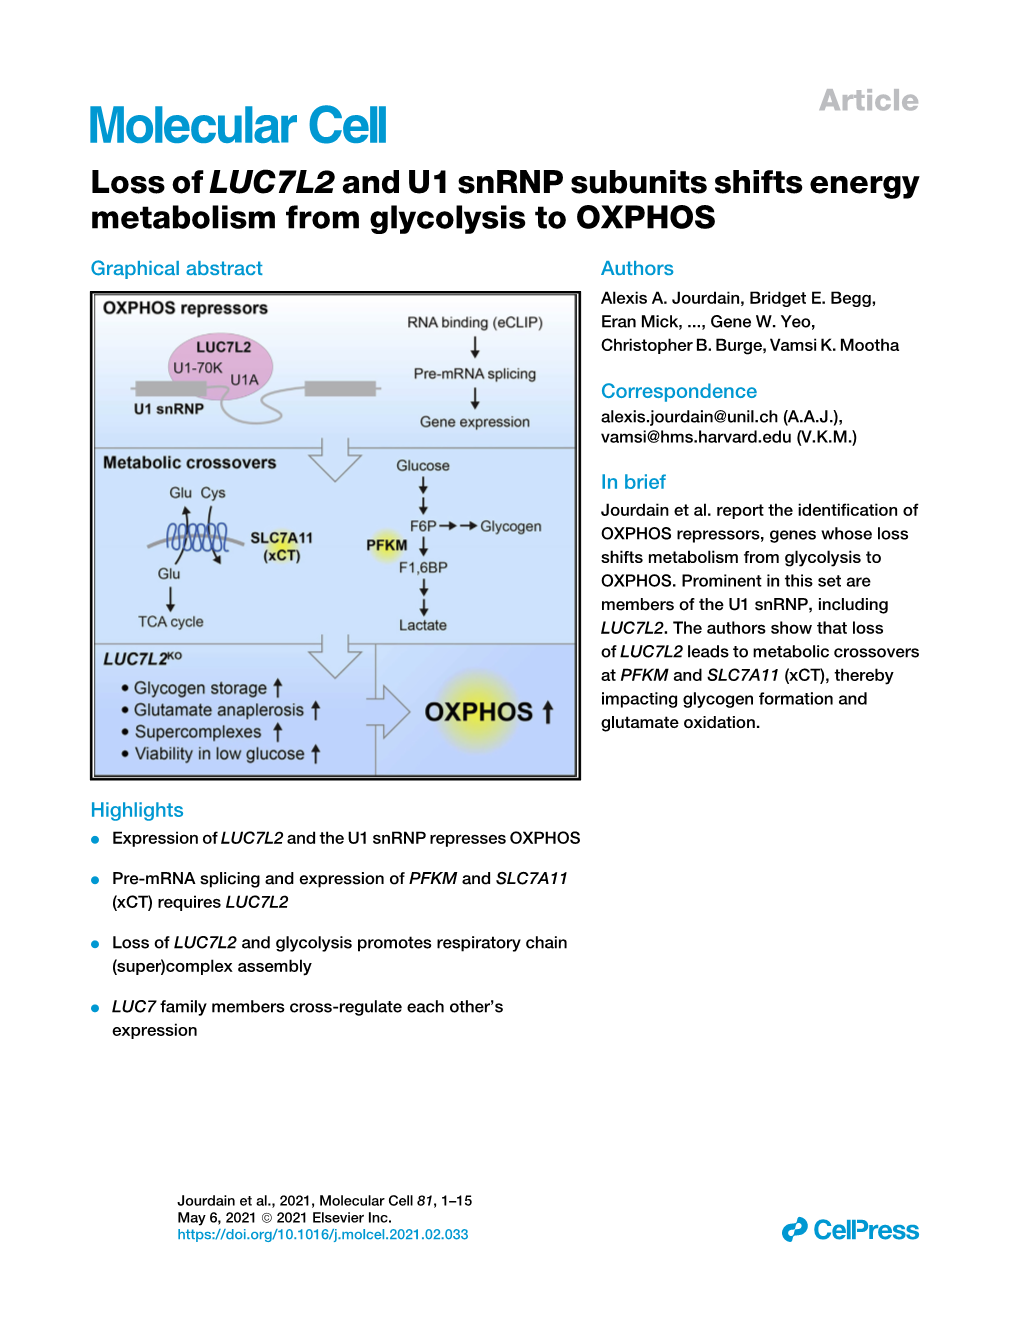 Loss of LUC7L2 and U1 Snrnp Subunits Shifts Energy Metabolism from Glycolysis to OXPHOS